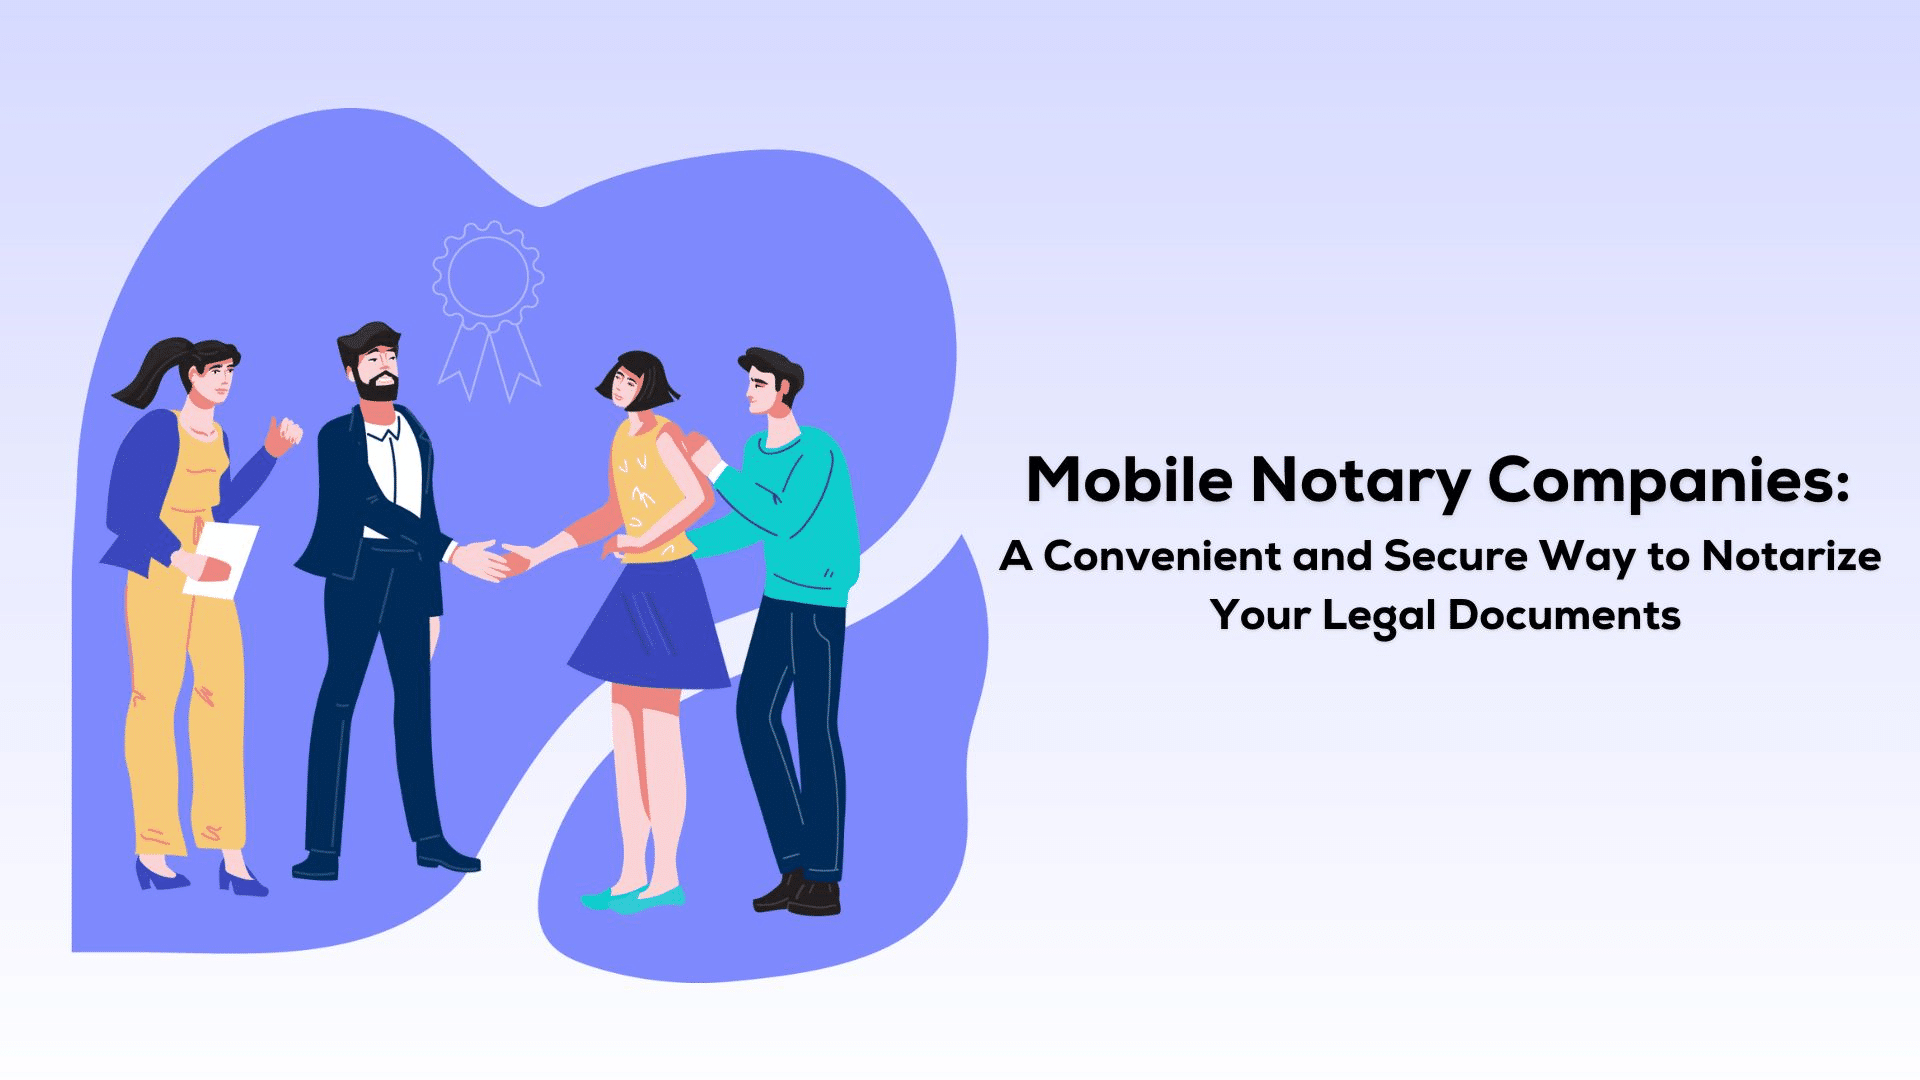 Mobile Notary Companies